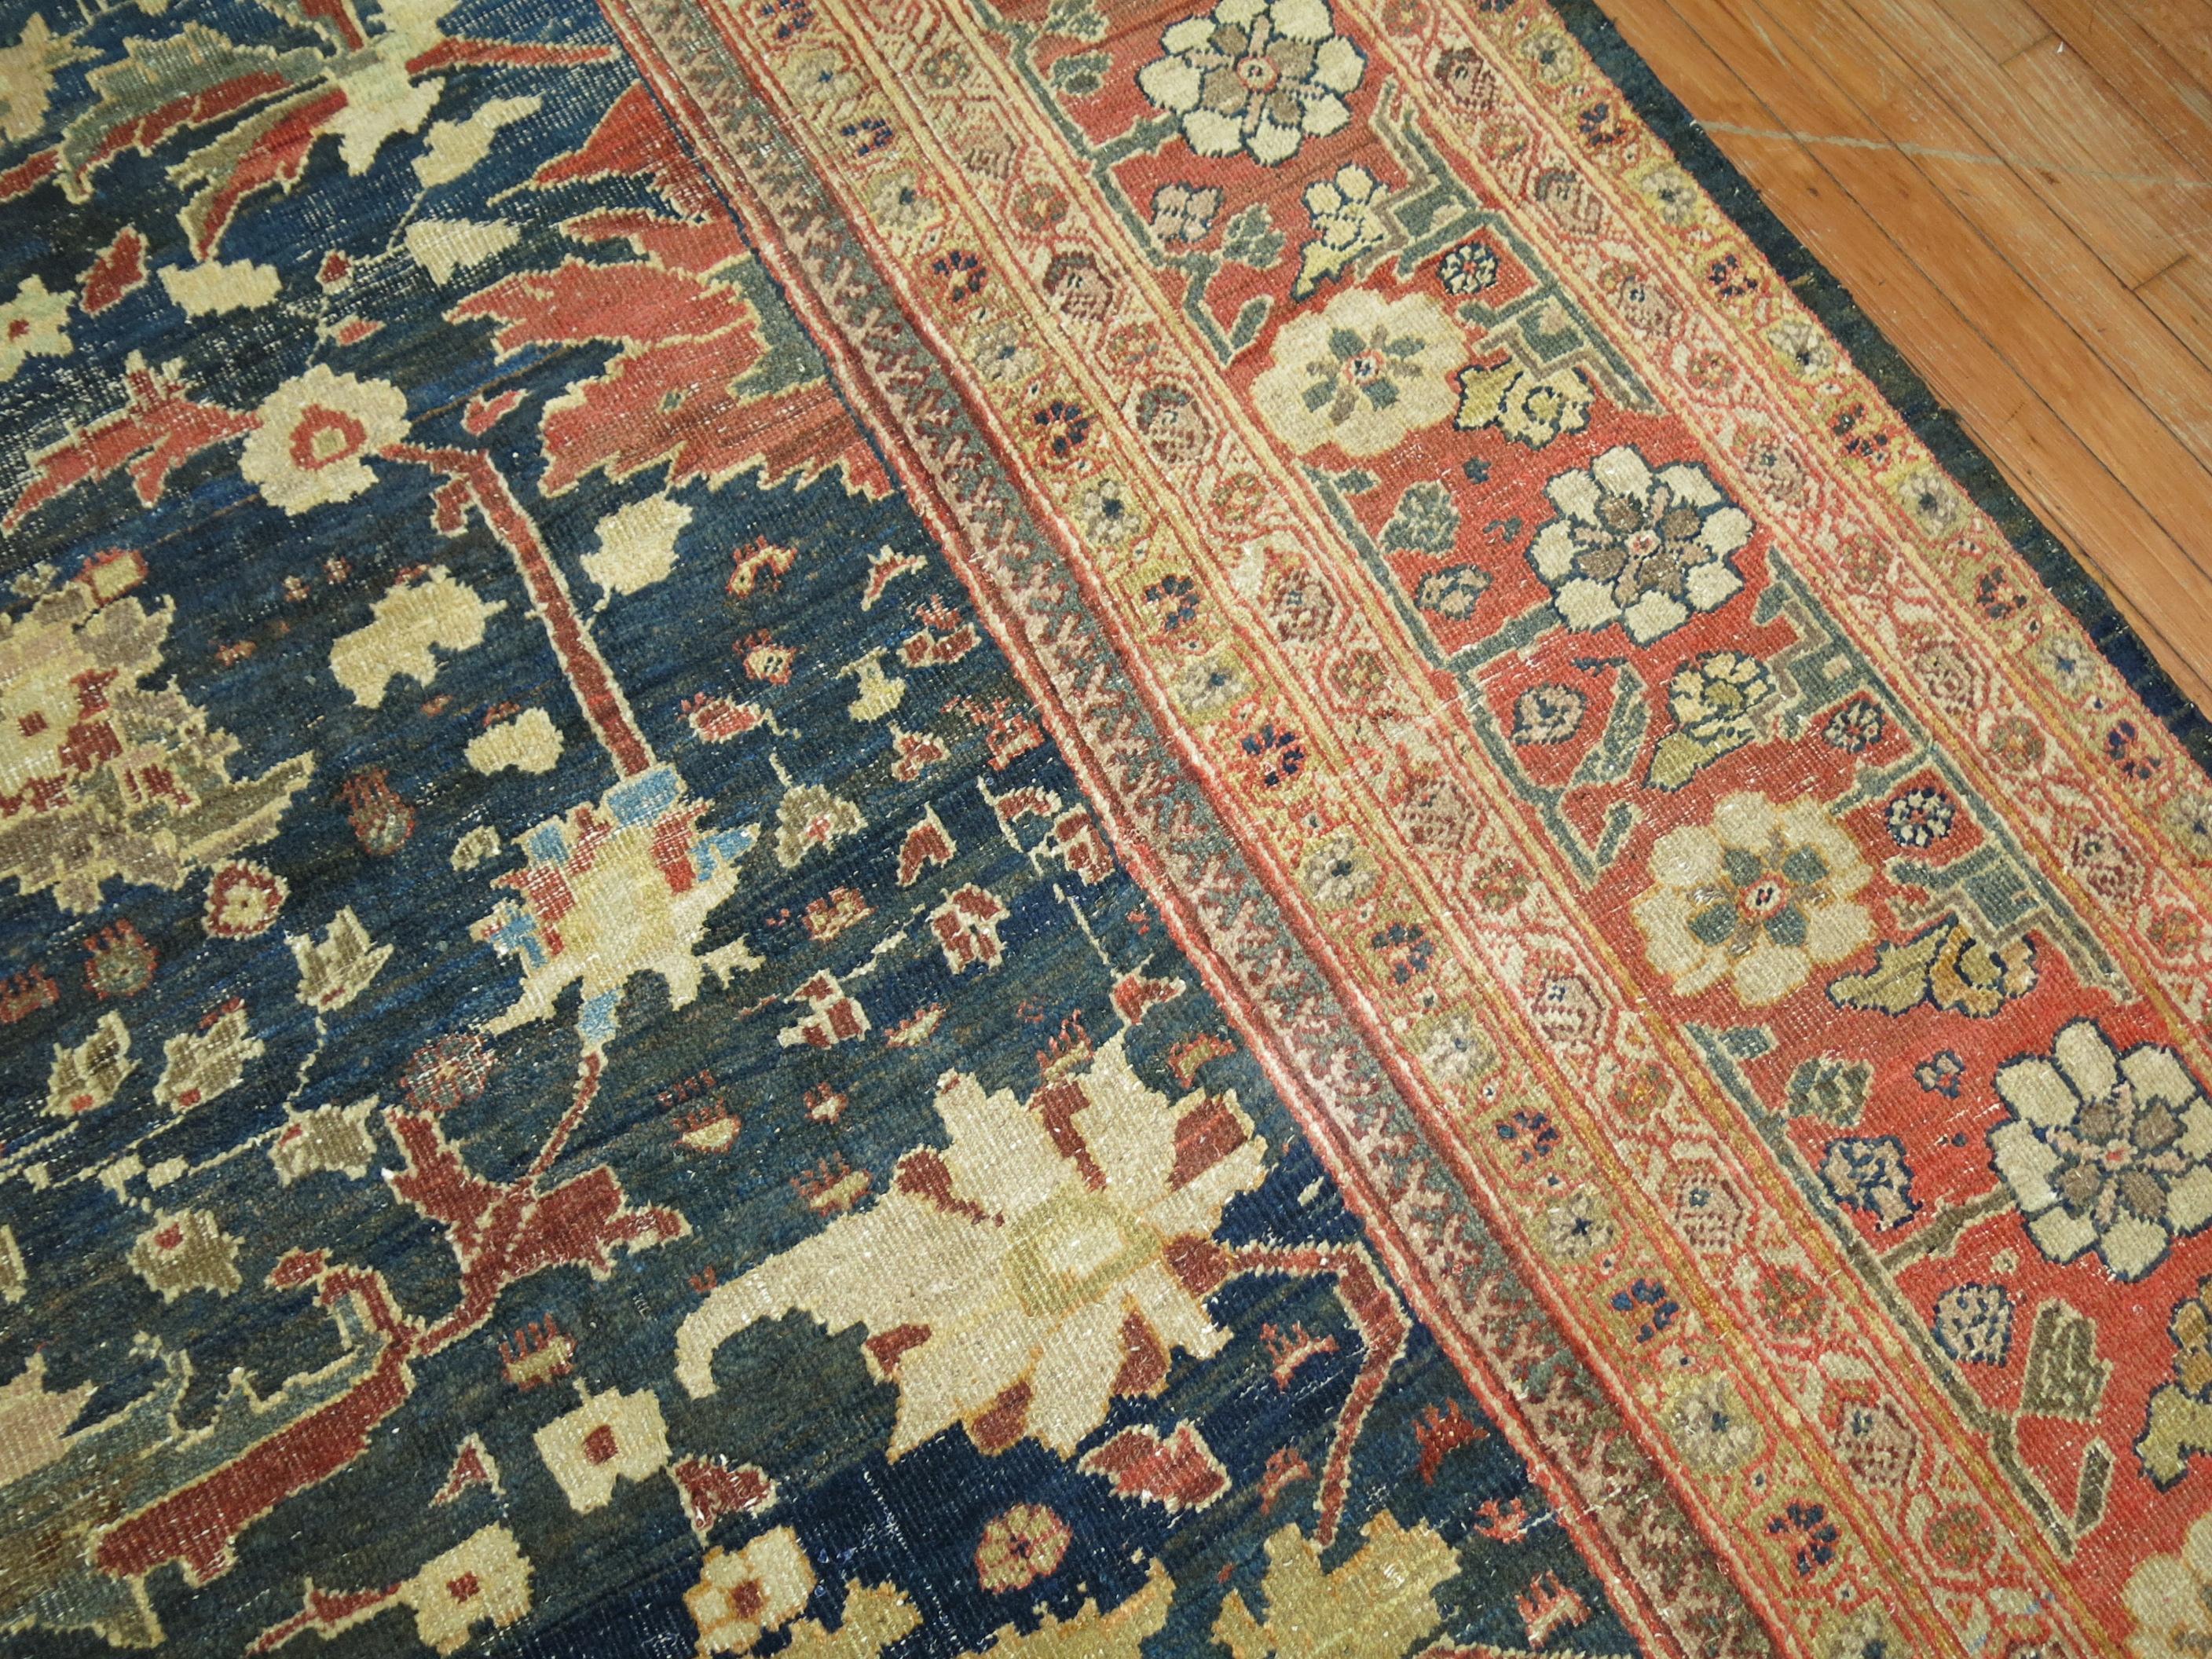 Wool Phenomenal Large Scale Antique Sultanabad Mahal Persian Carpet